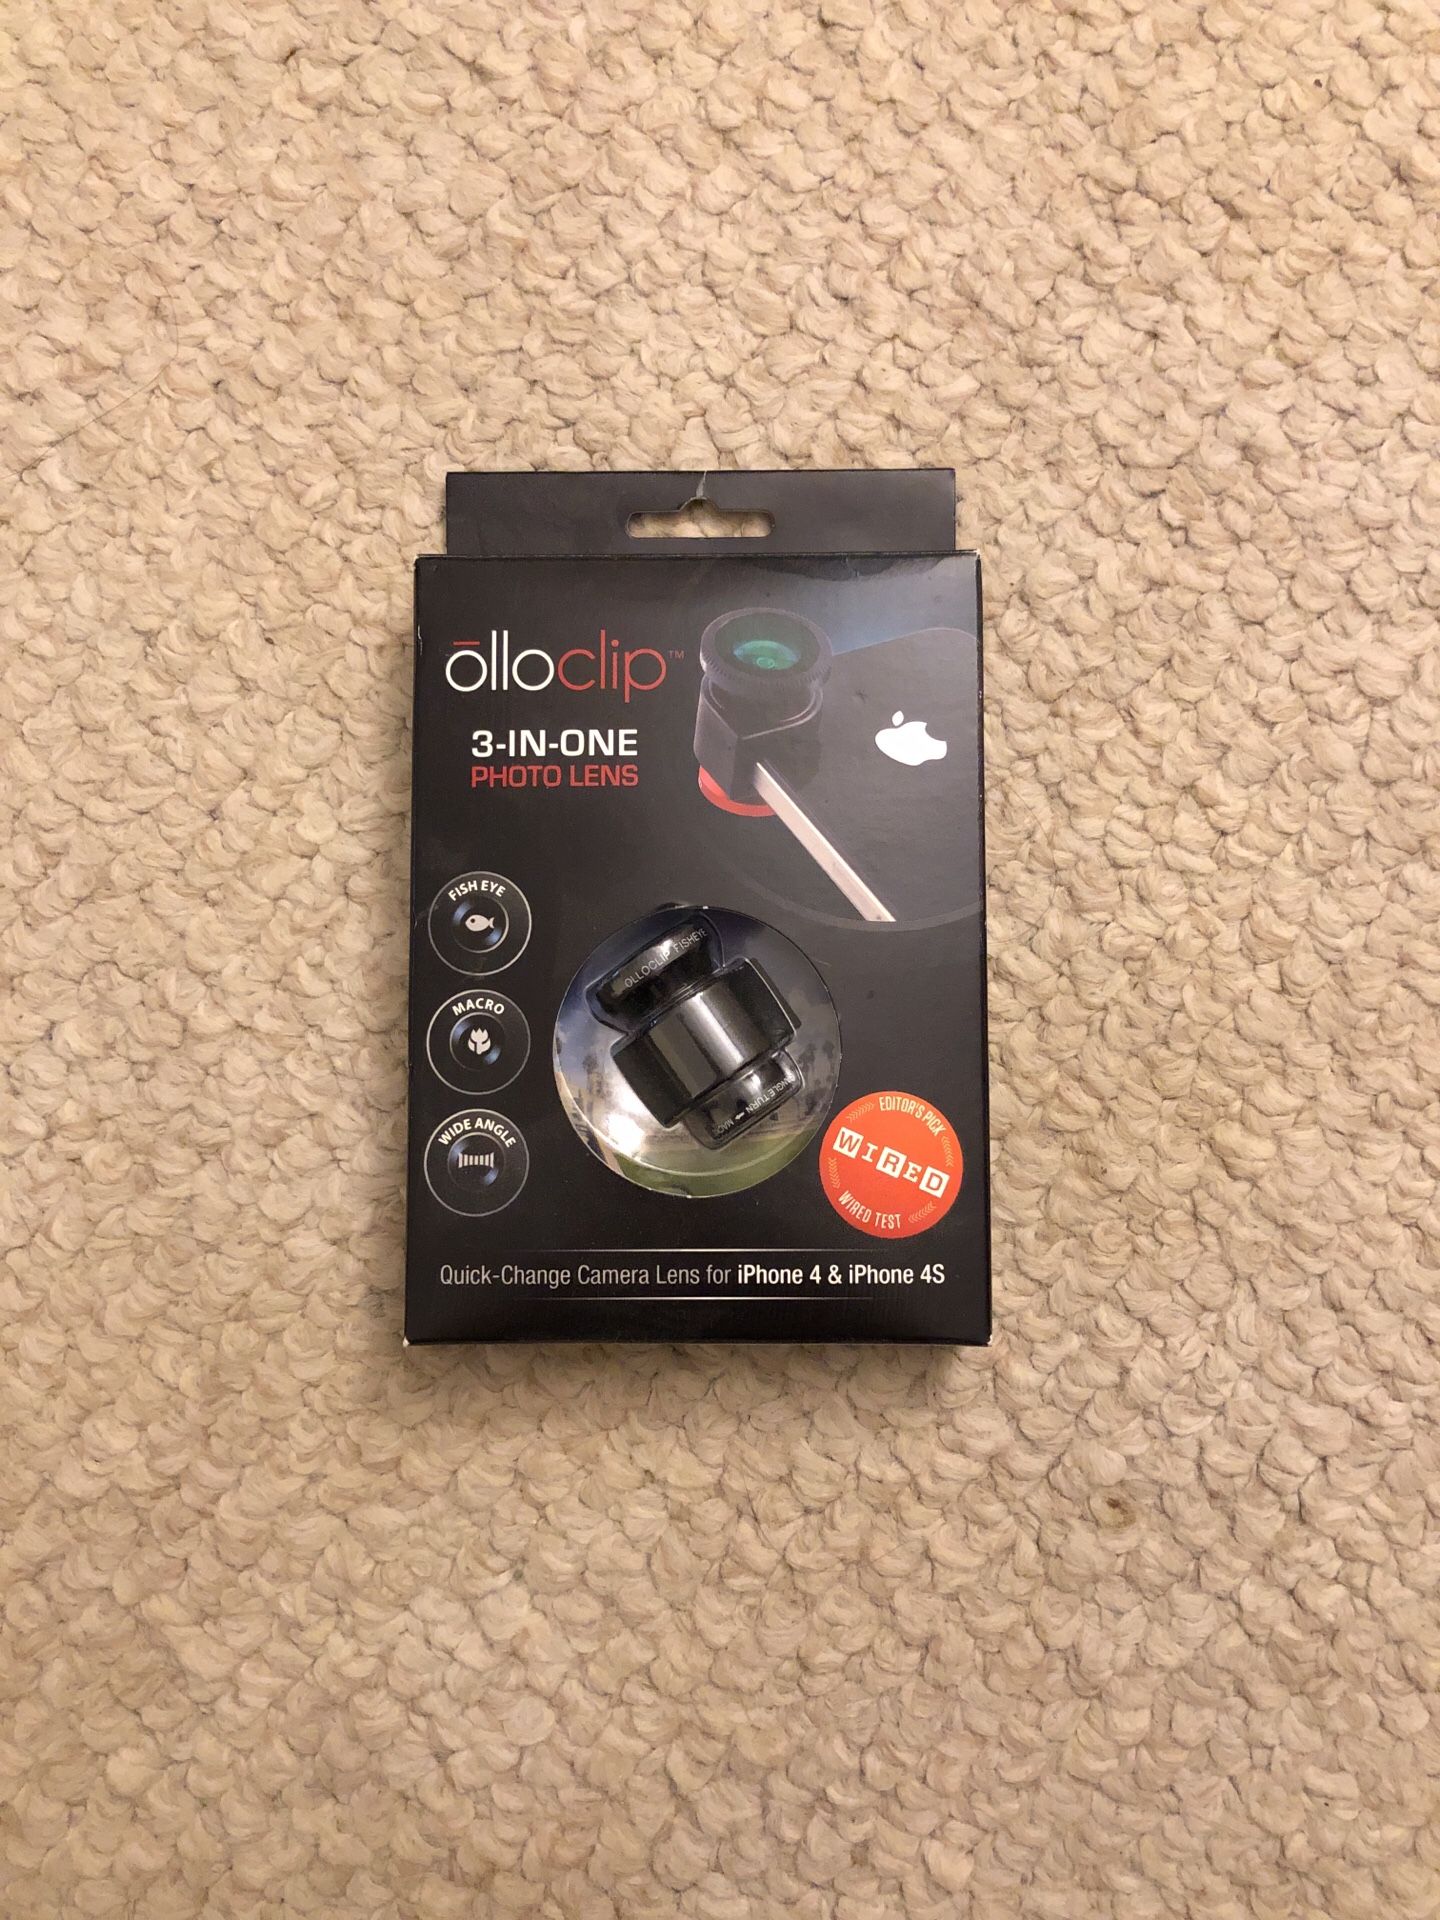 Ollo clip lens for iPhone 4 & 4s used